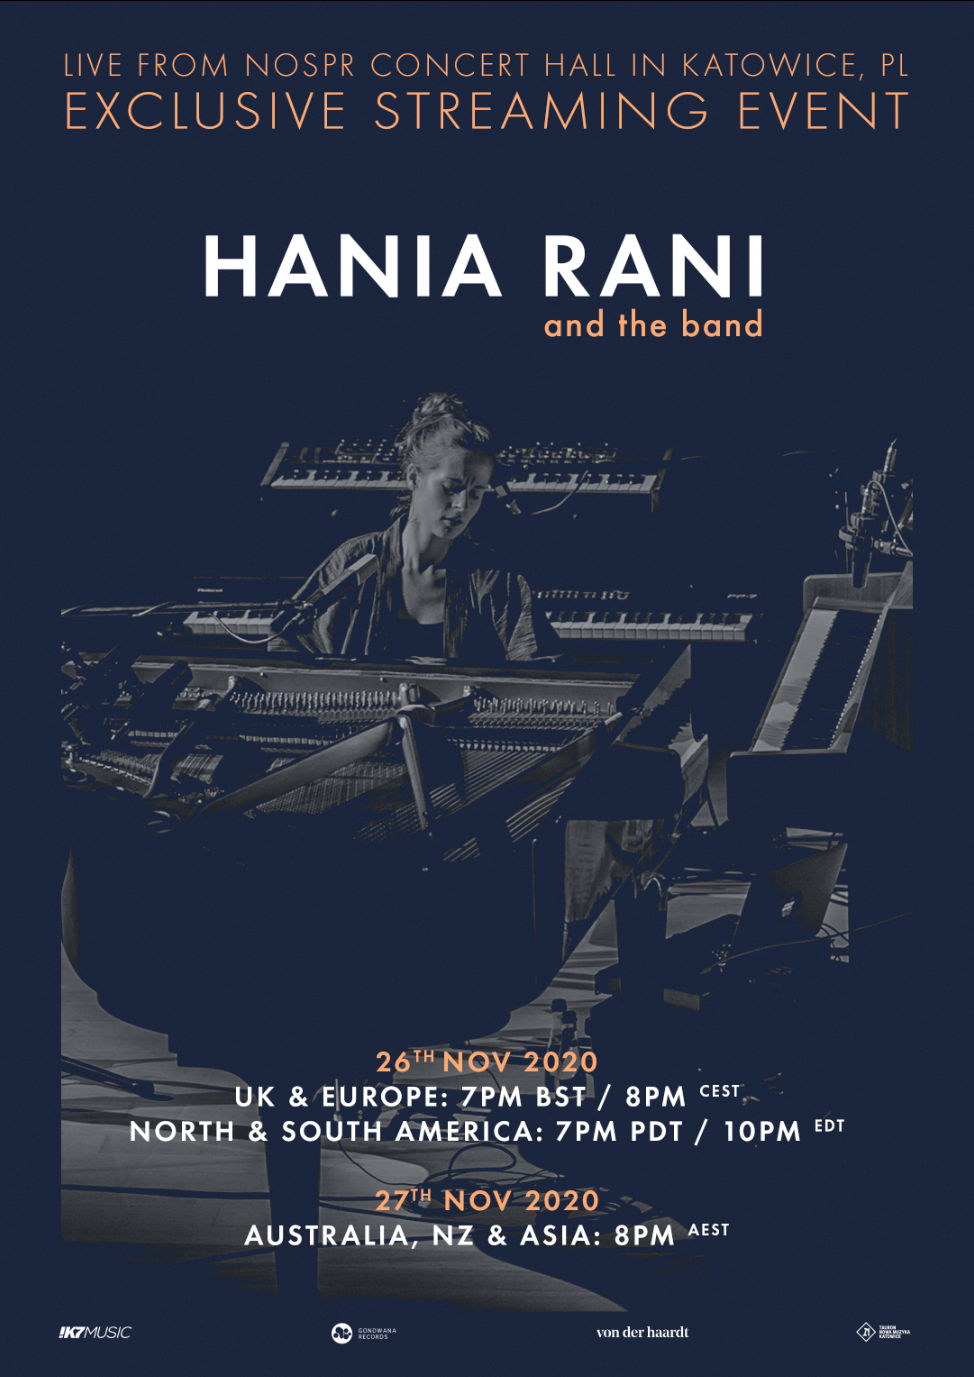 Hania Rani Band Live Nospr Katowice World Exclusive Streaming Event Events Universe